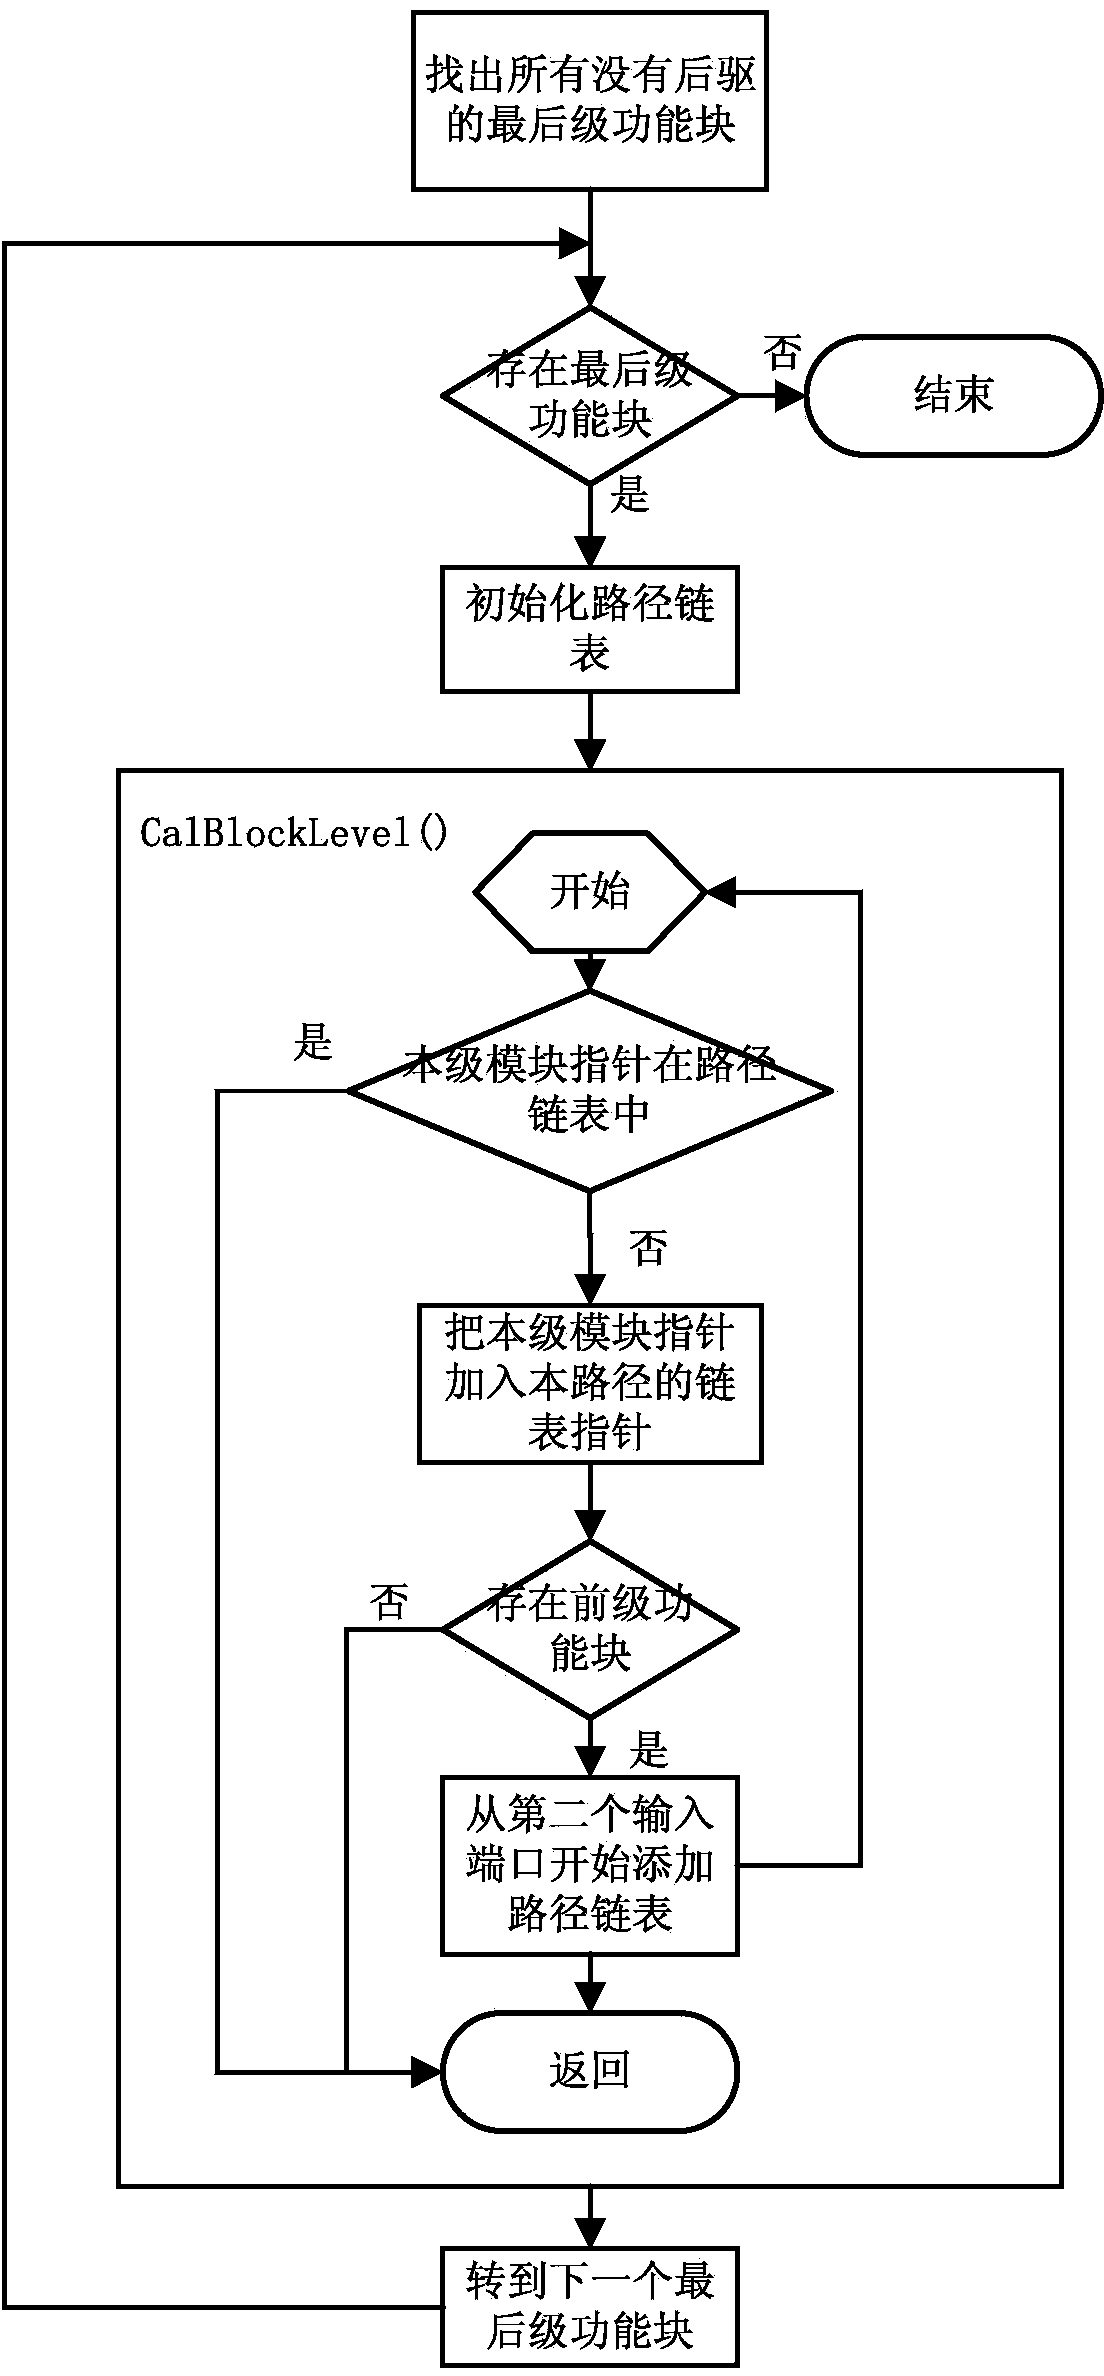 Logic network topology sorting and storing method for fault diagnosing system